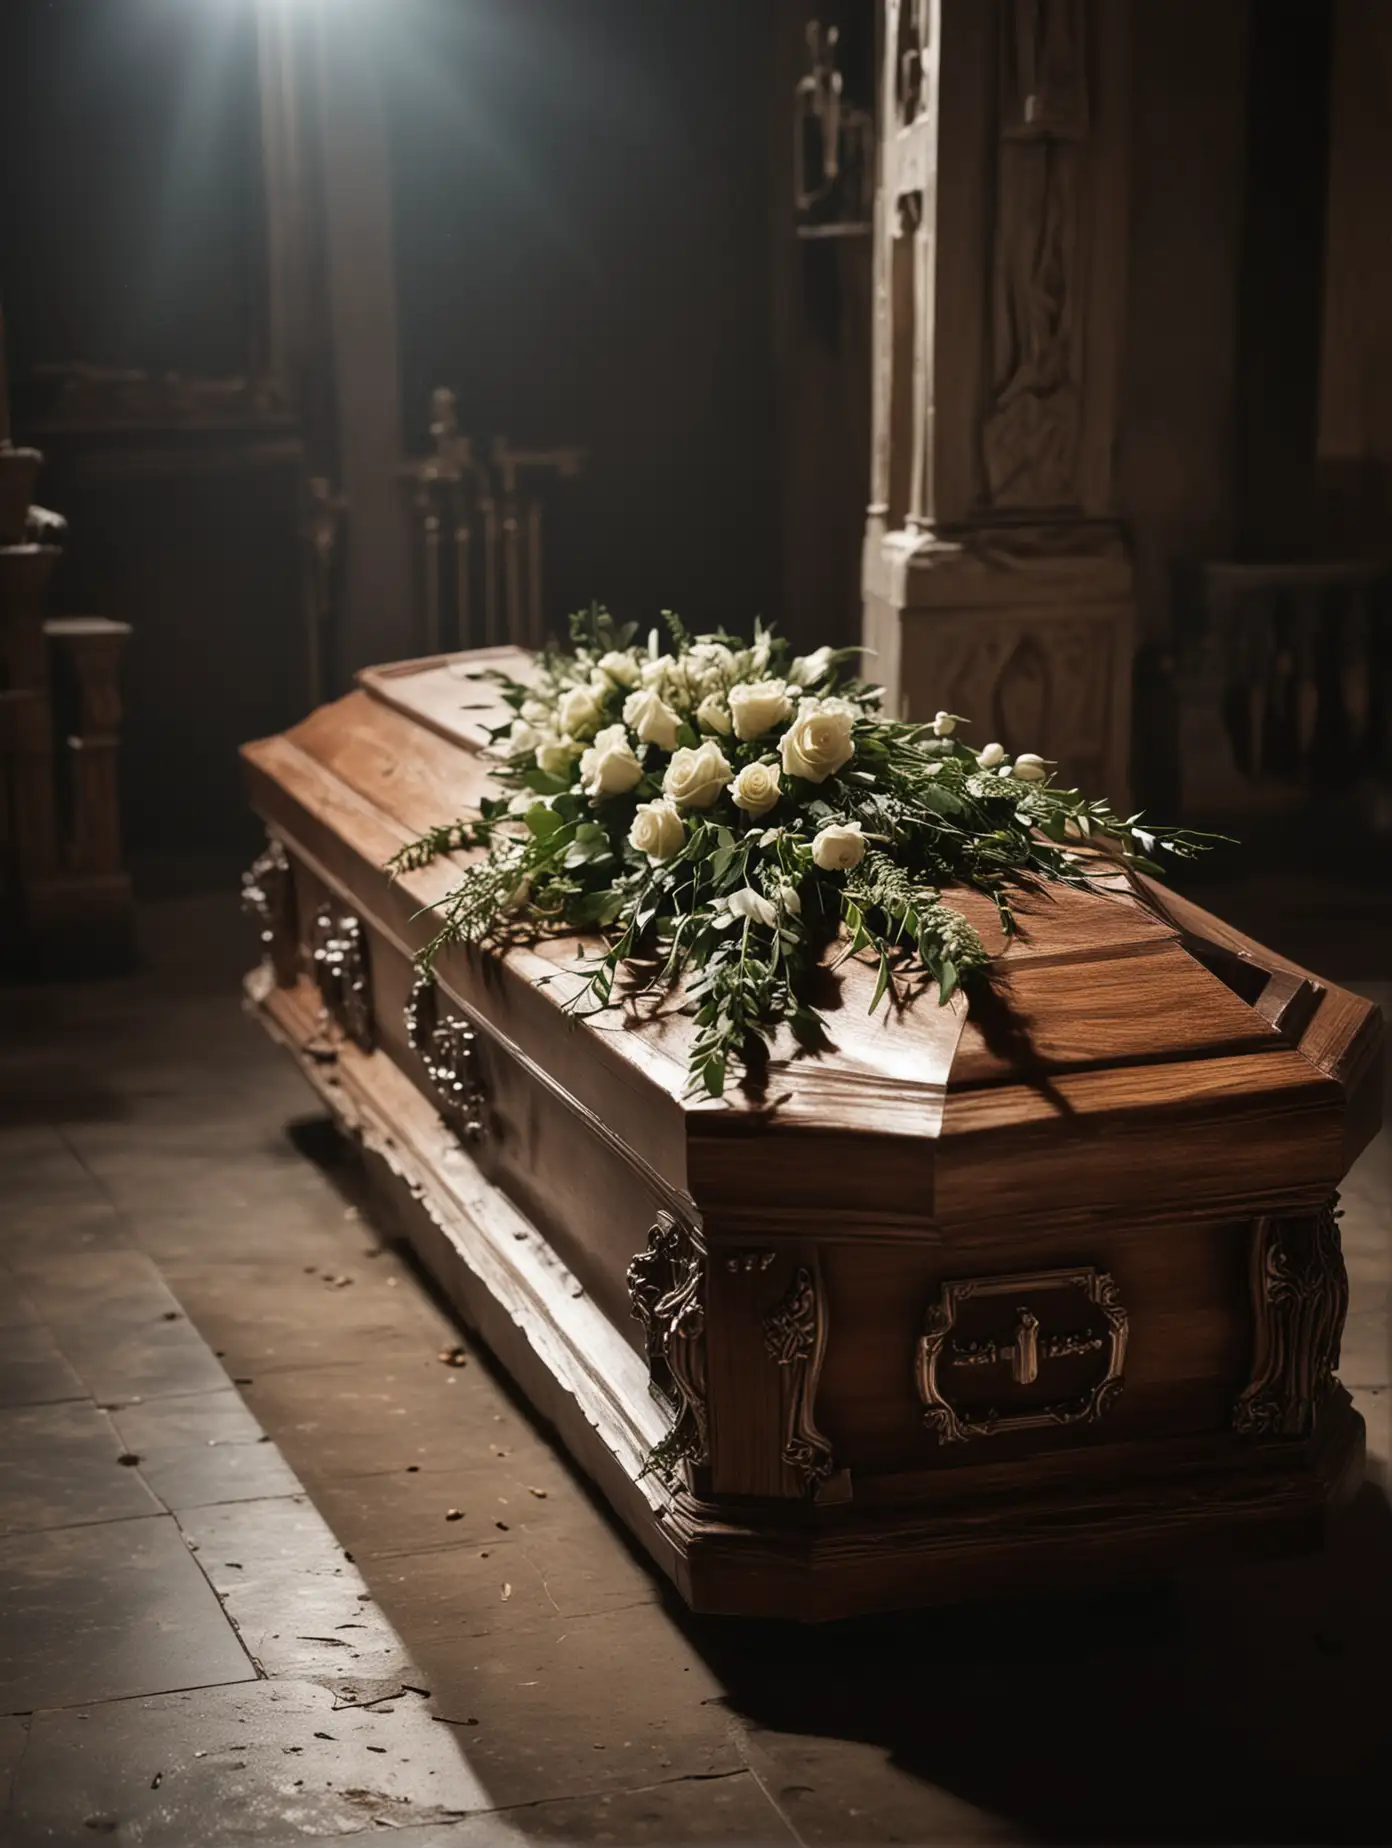 single dark bokeh light source, fragment of a modest modern coffin standing on a catafalque in the church, coffin seen in perspective, modest funeral bouquet lying on the coffin lid, blurred dark background